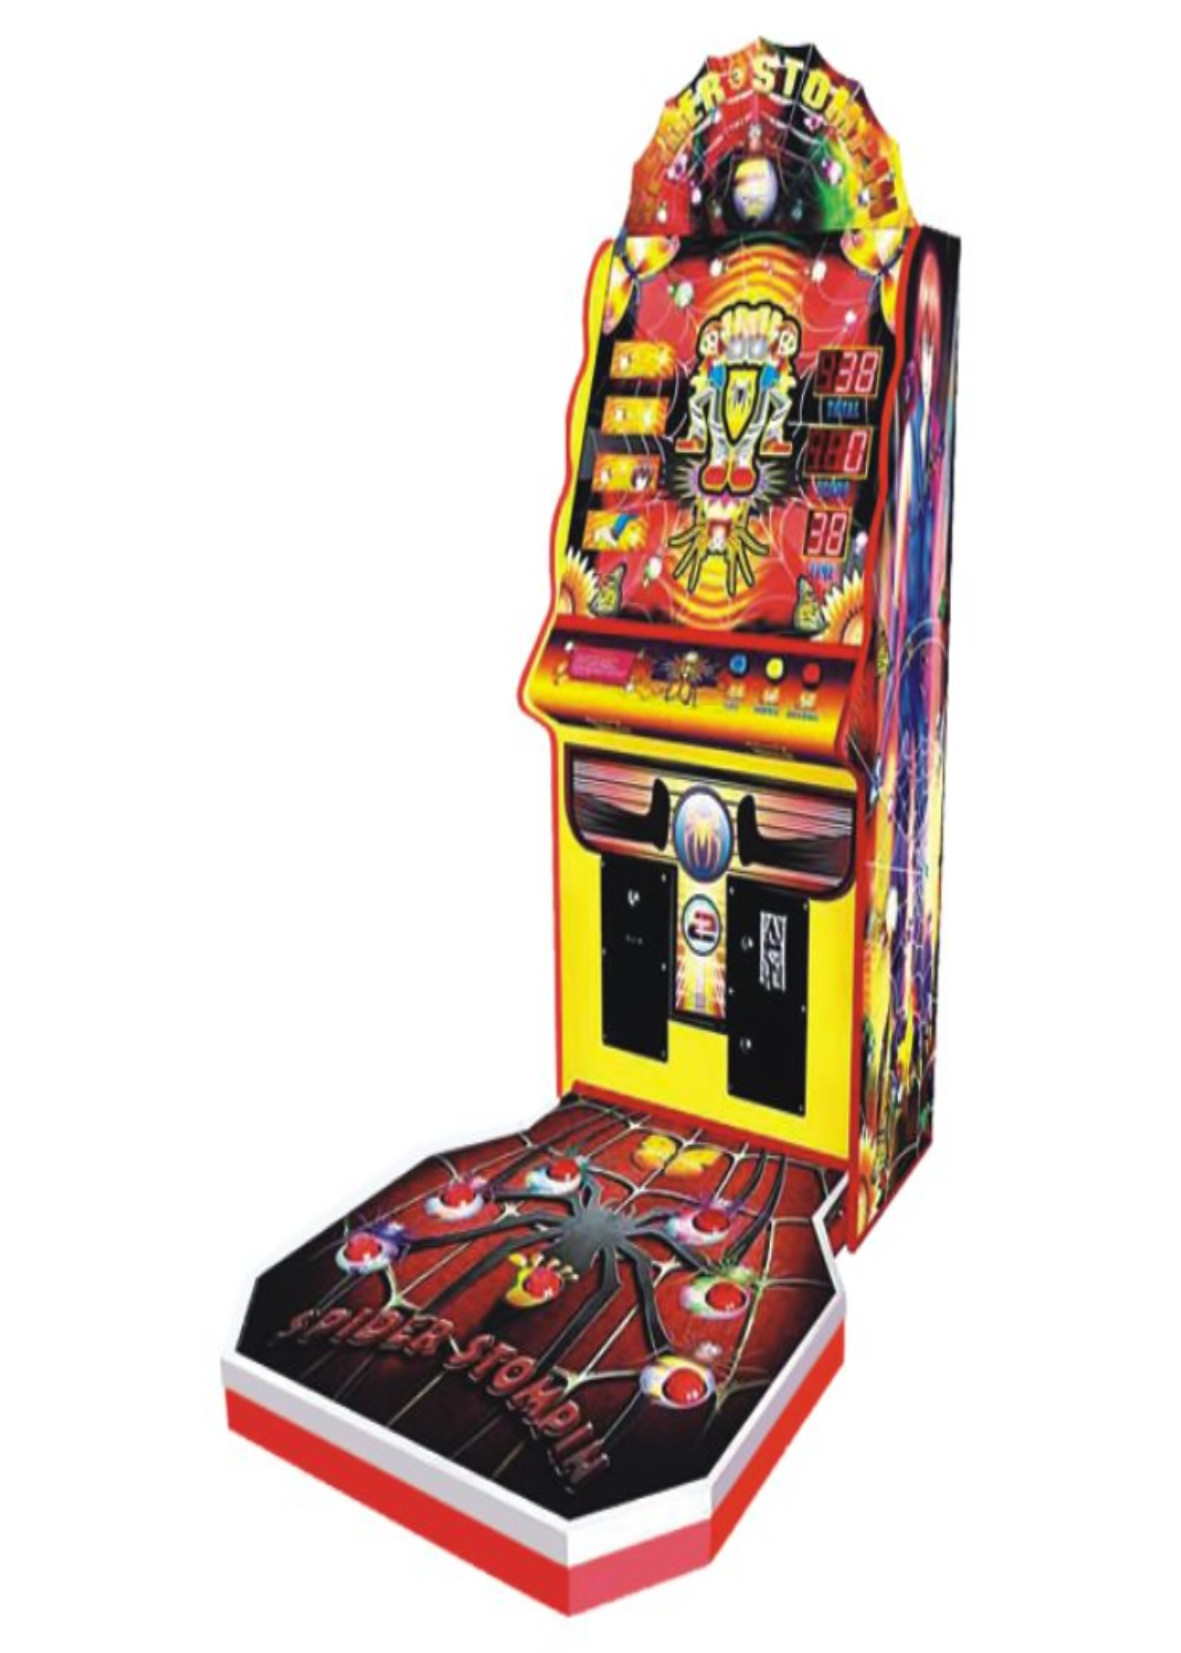 Cheap Sport Exciting Game Arcade Coin Operated Games Spider Stomp Theme Optional 3 Levels easy normal difficult for sale